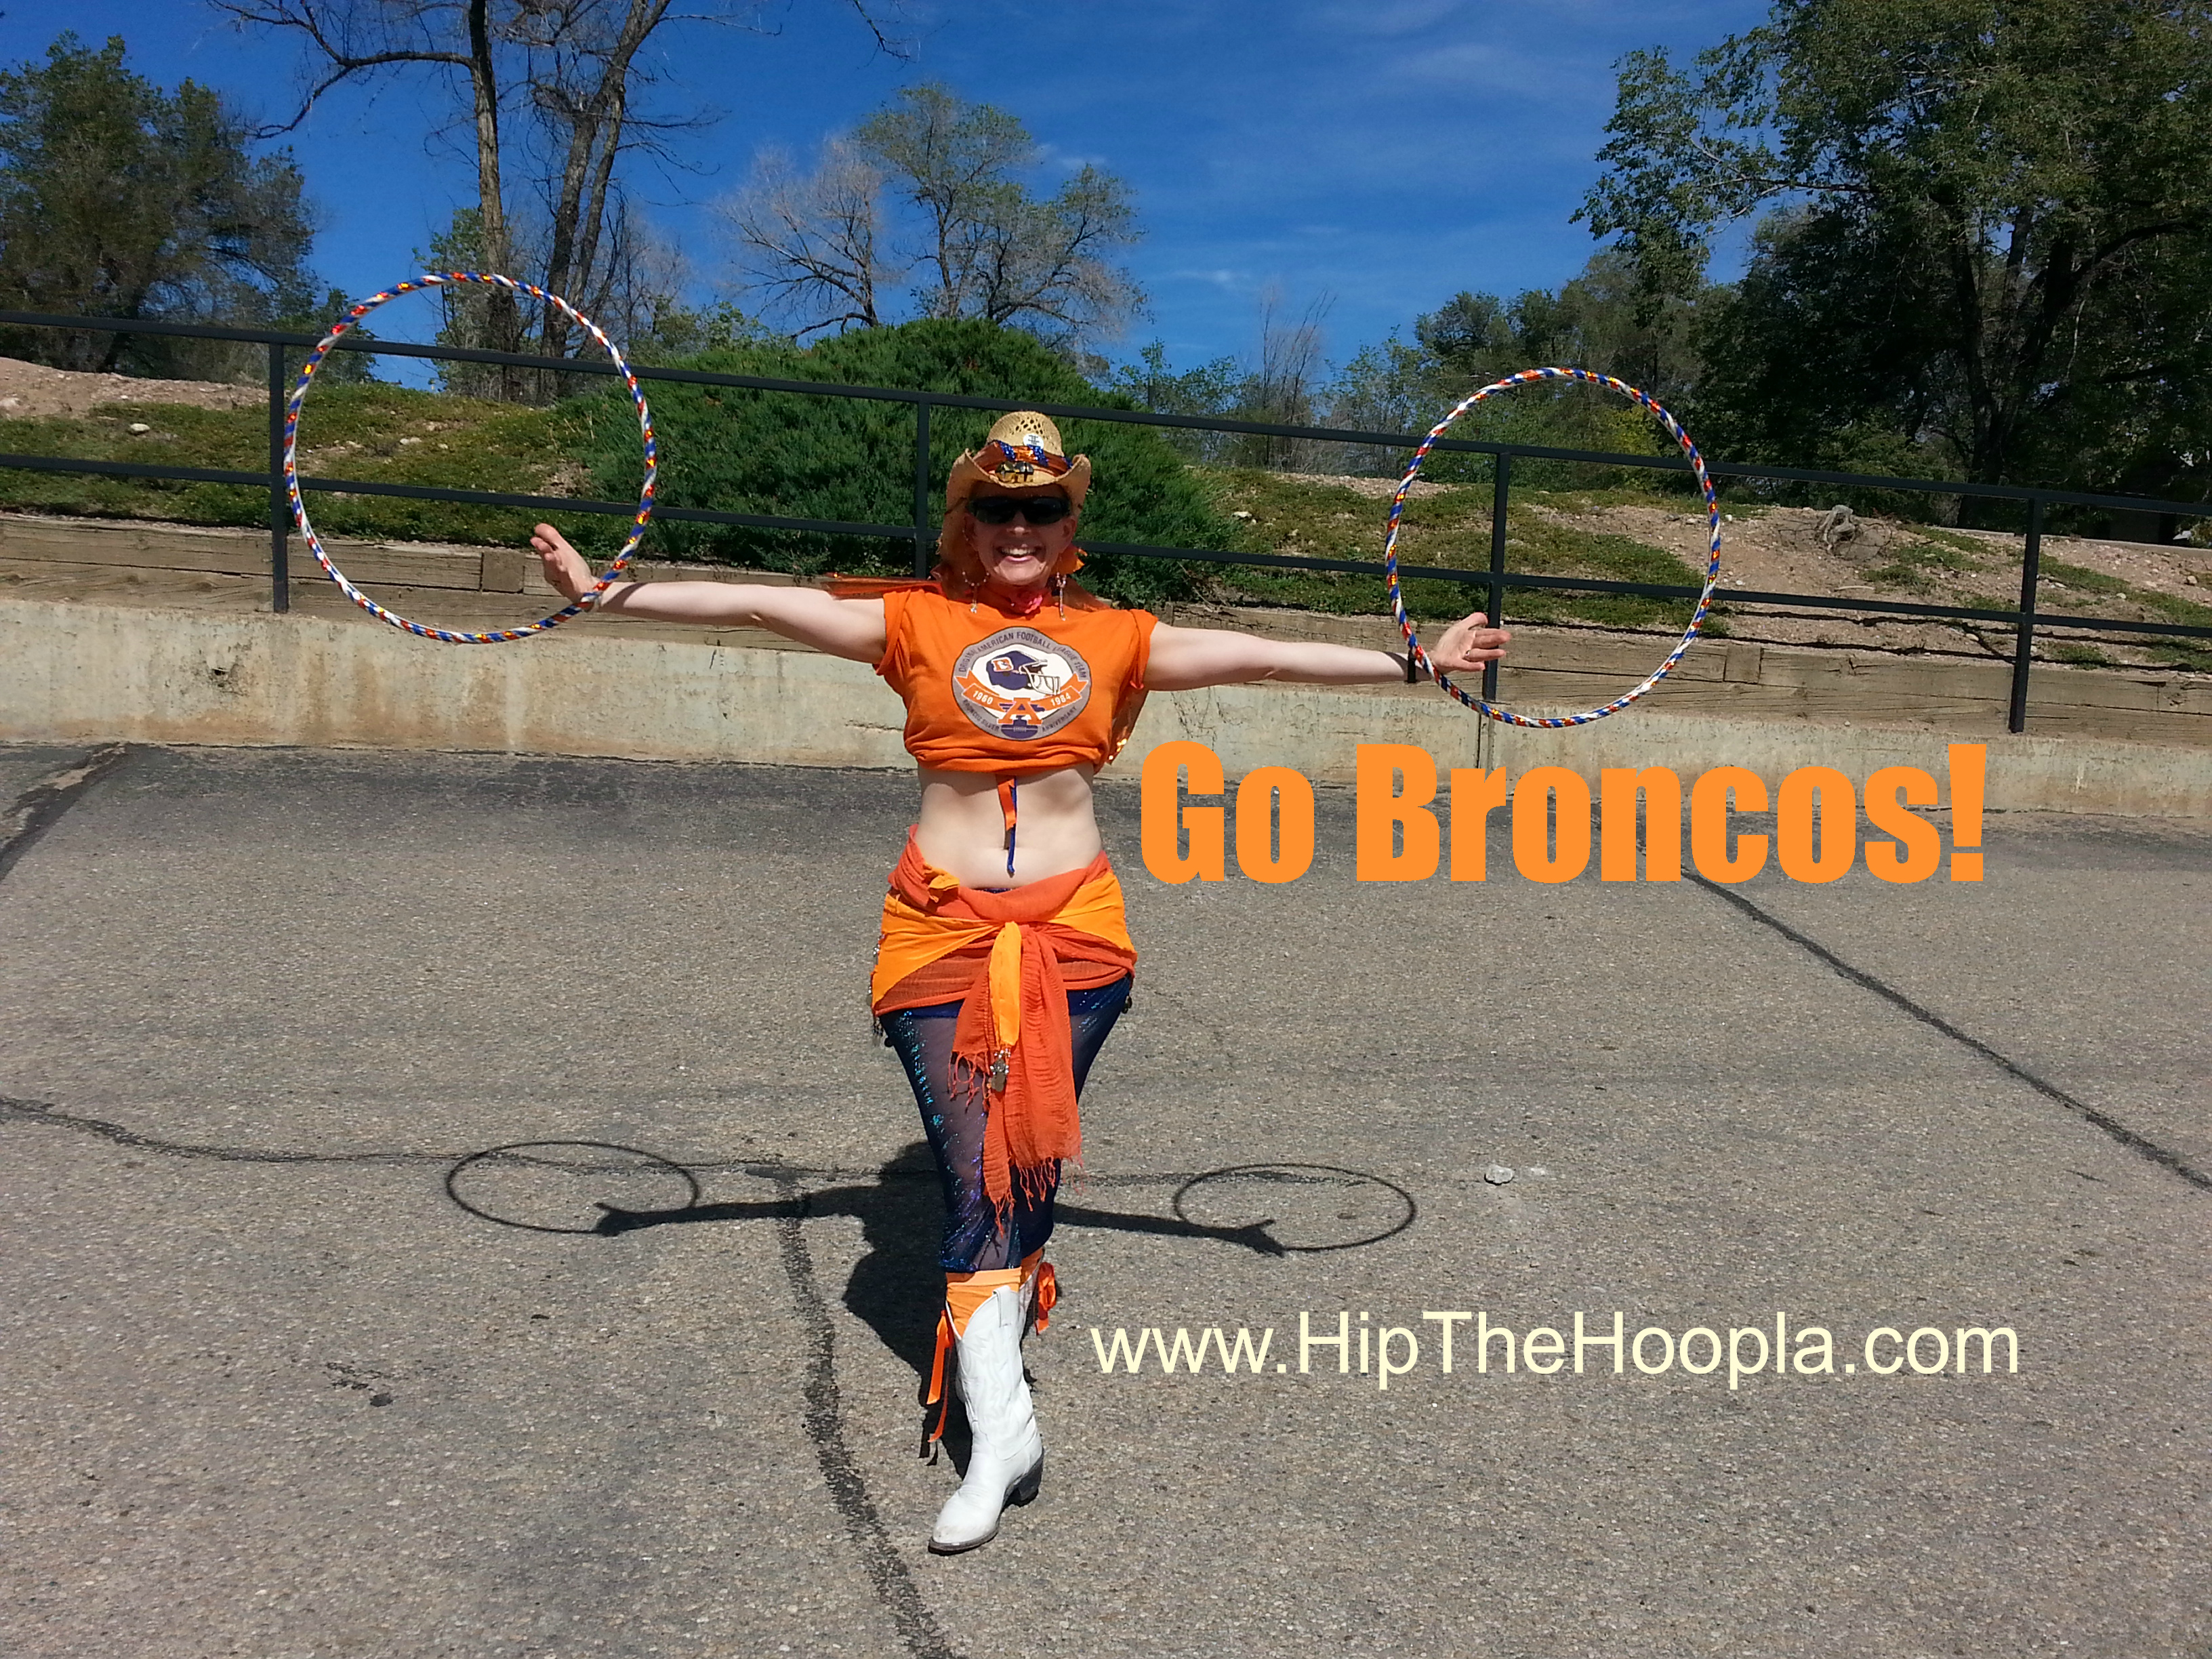 Che Rippinger of Hip The Hoopla - Twin Mini hooping for Denver Broncos Football season